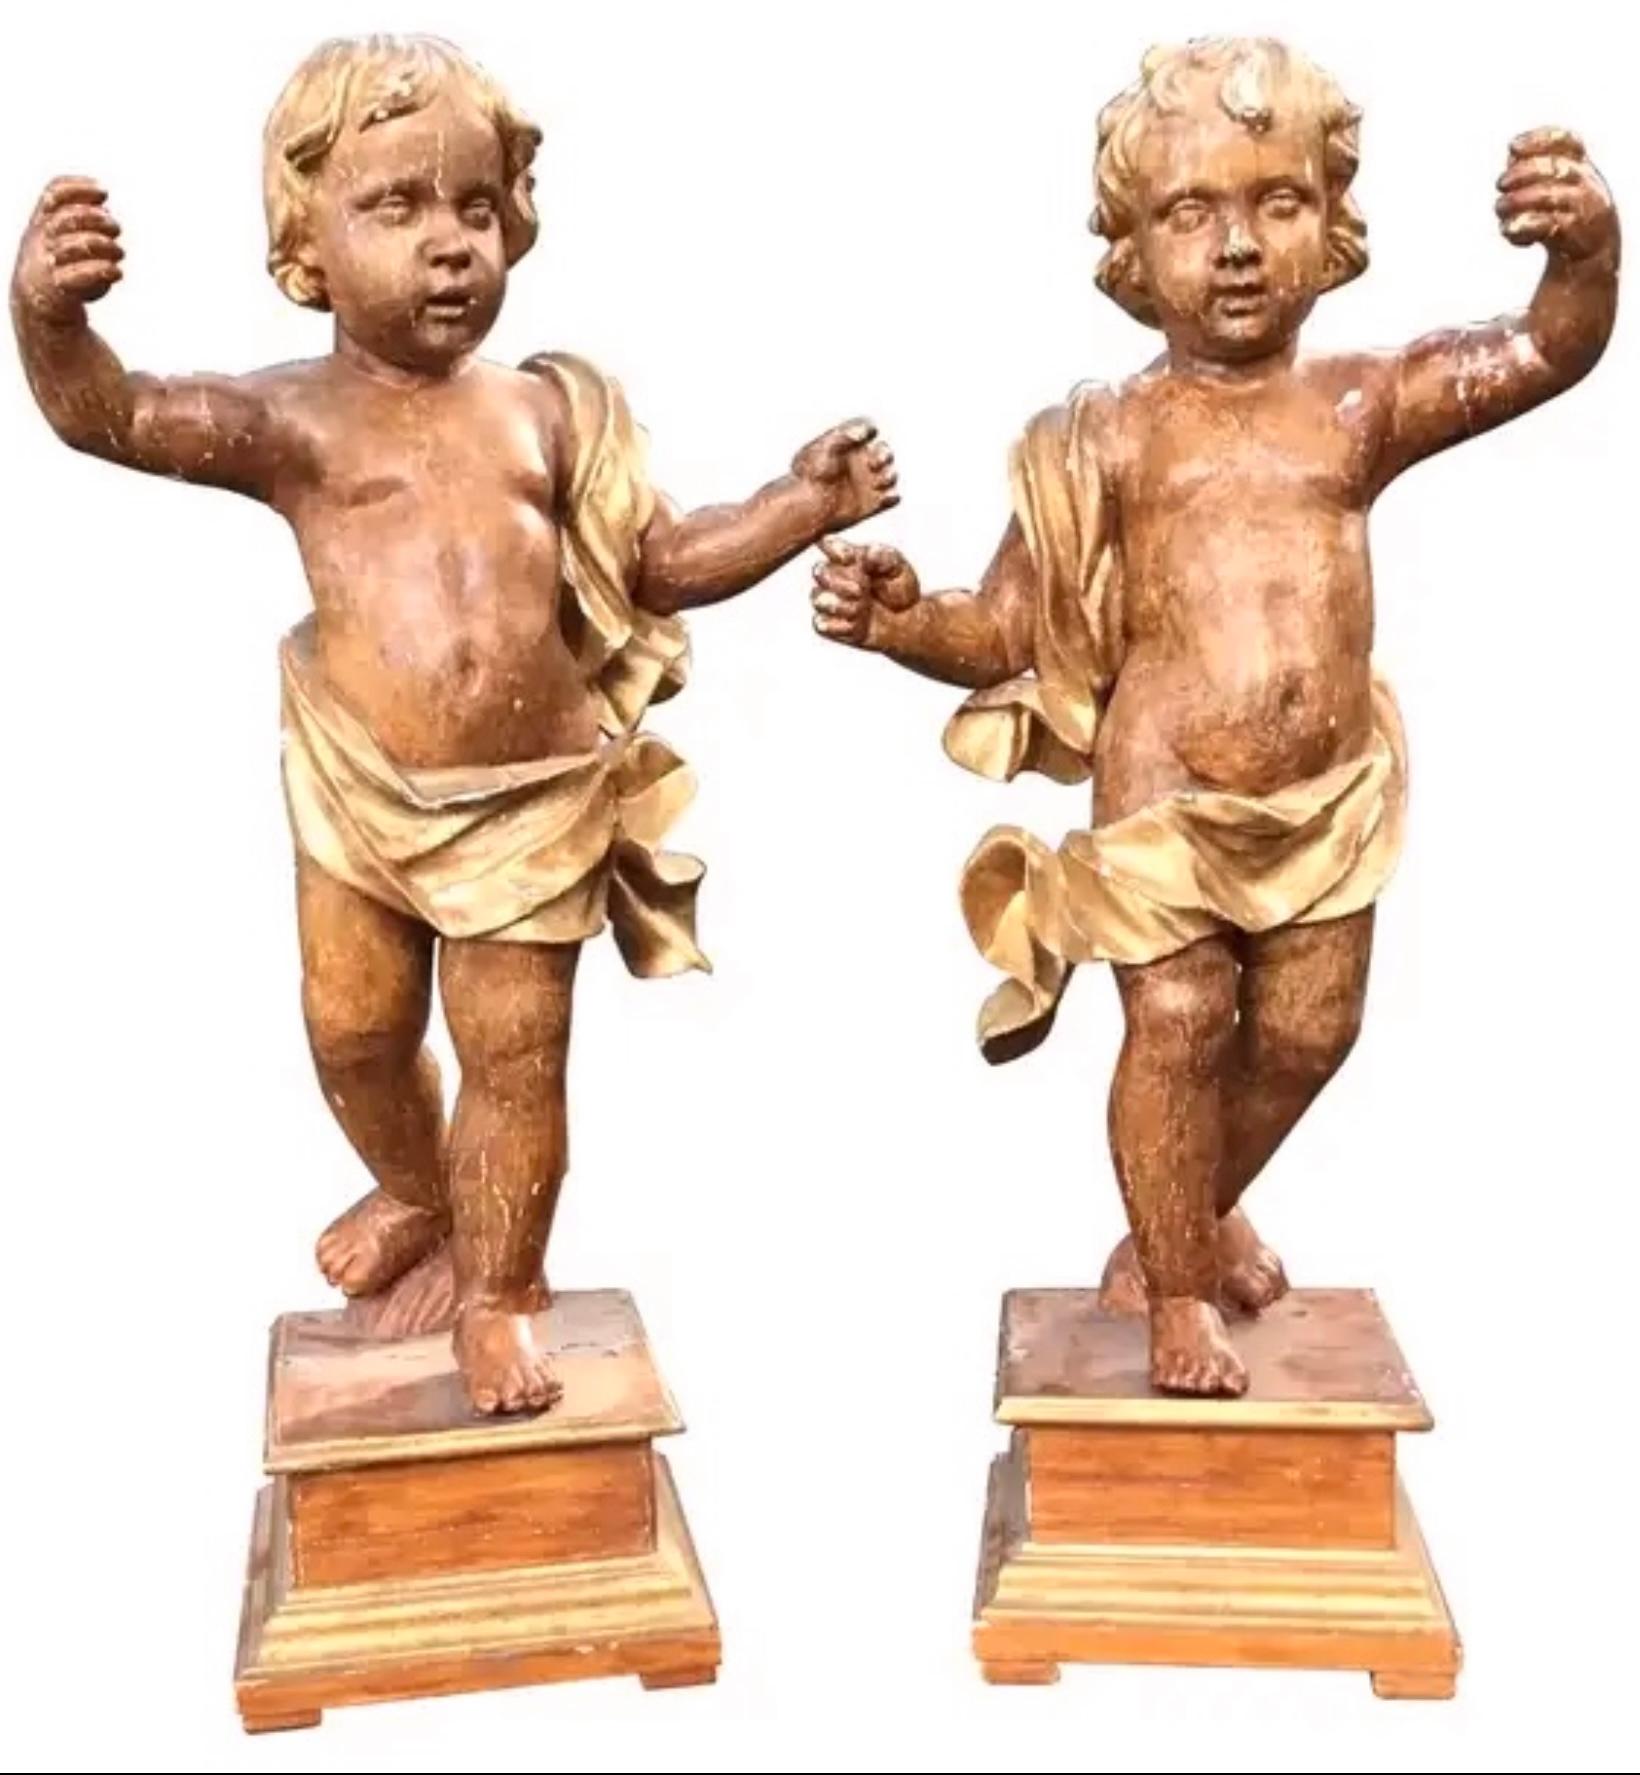 Quite a stunning pair of Italian standing cherub or Angel carvings from the 18th century. Standing at almost 4 feet tall, the pair are quite large and realistic. Very impressive. With original hand forged iron hooks to secure them to a wall. An